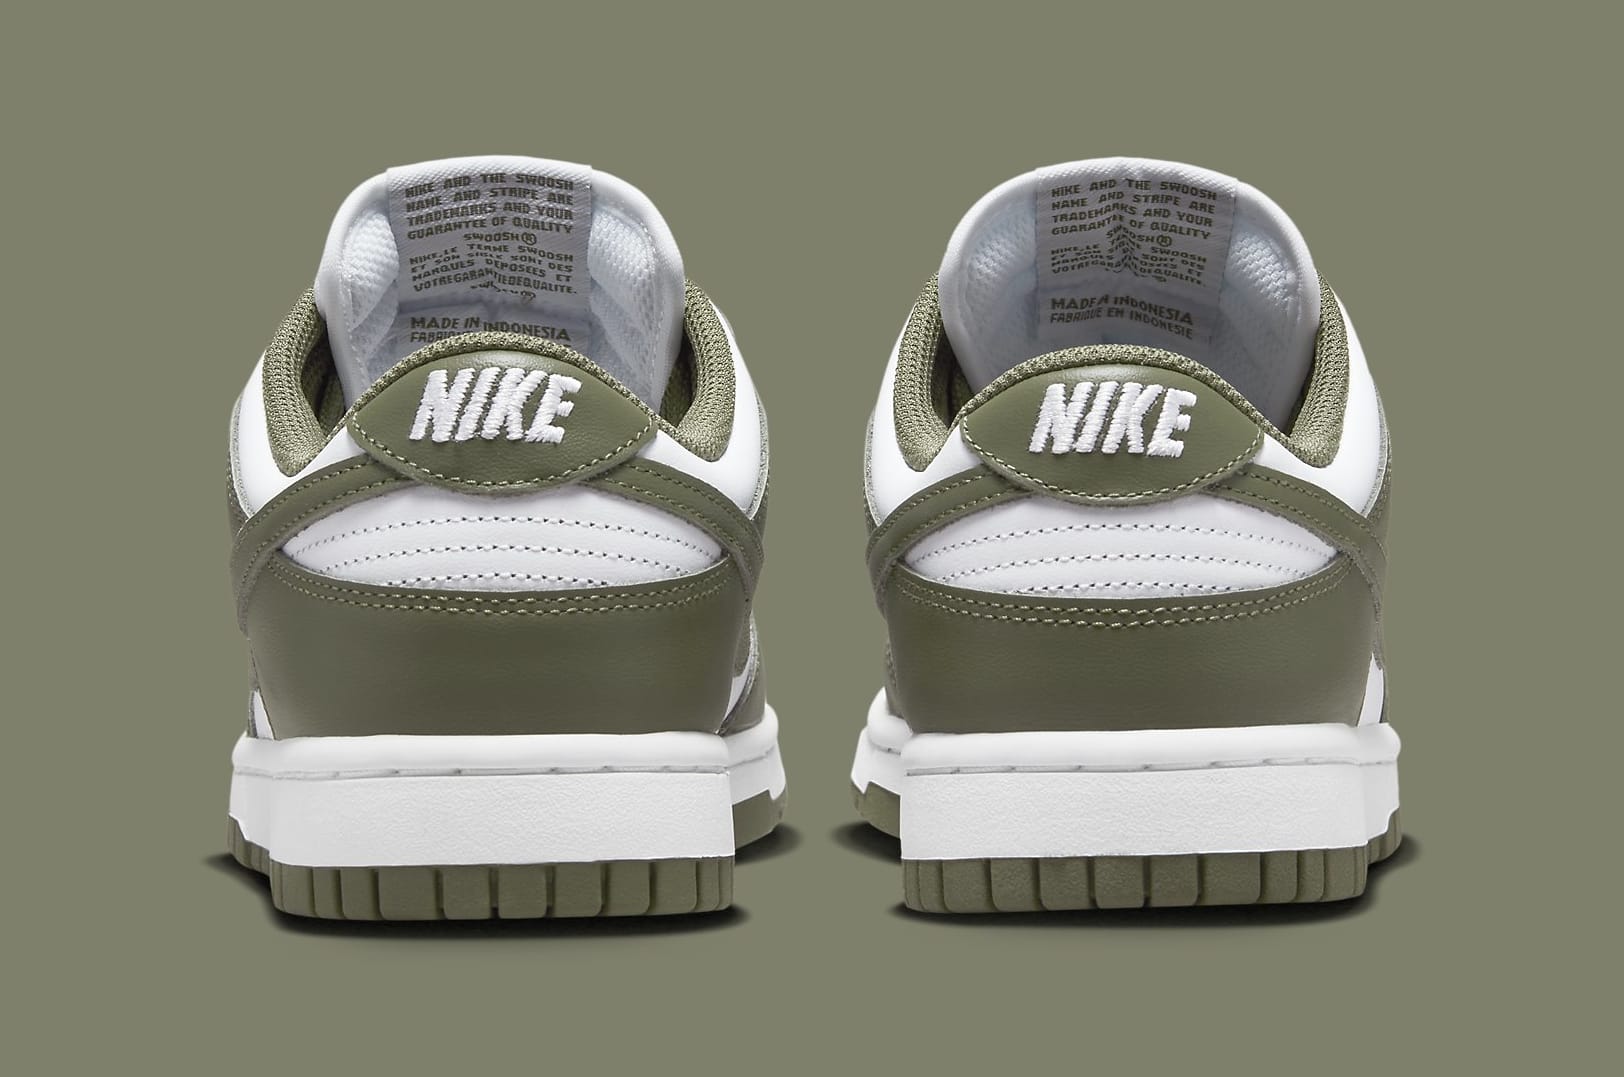 Medium Olive' Nike Dunk Releases in September | Complex